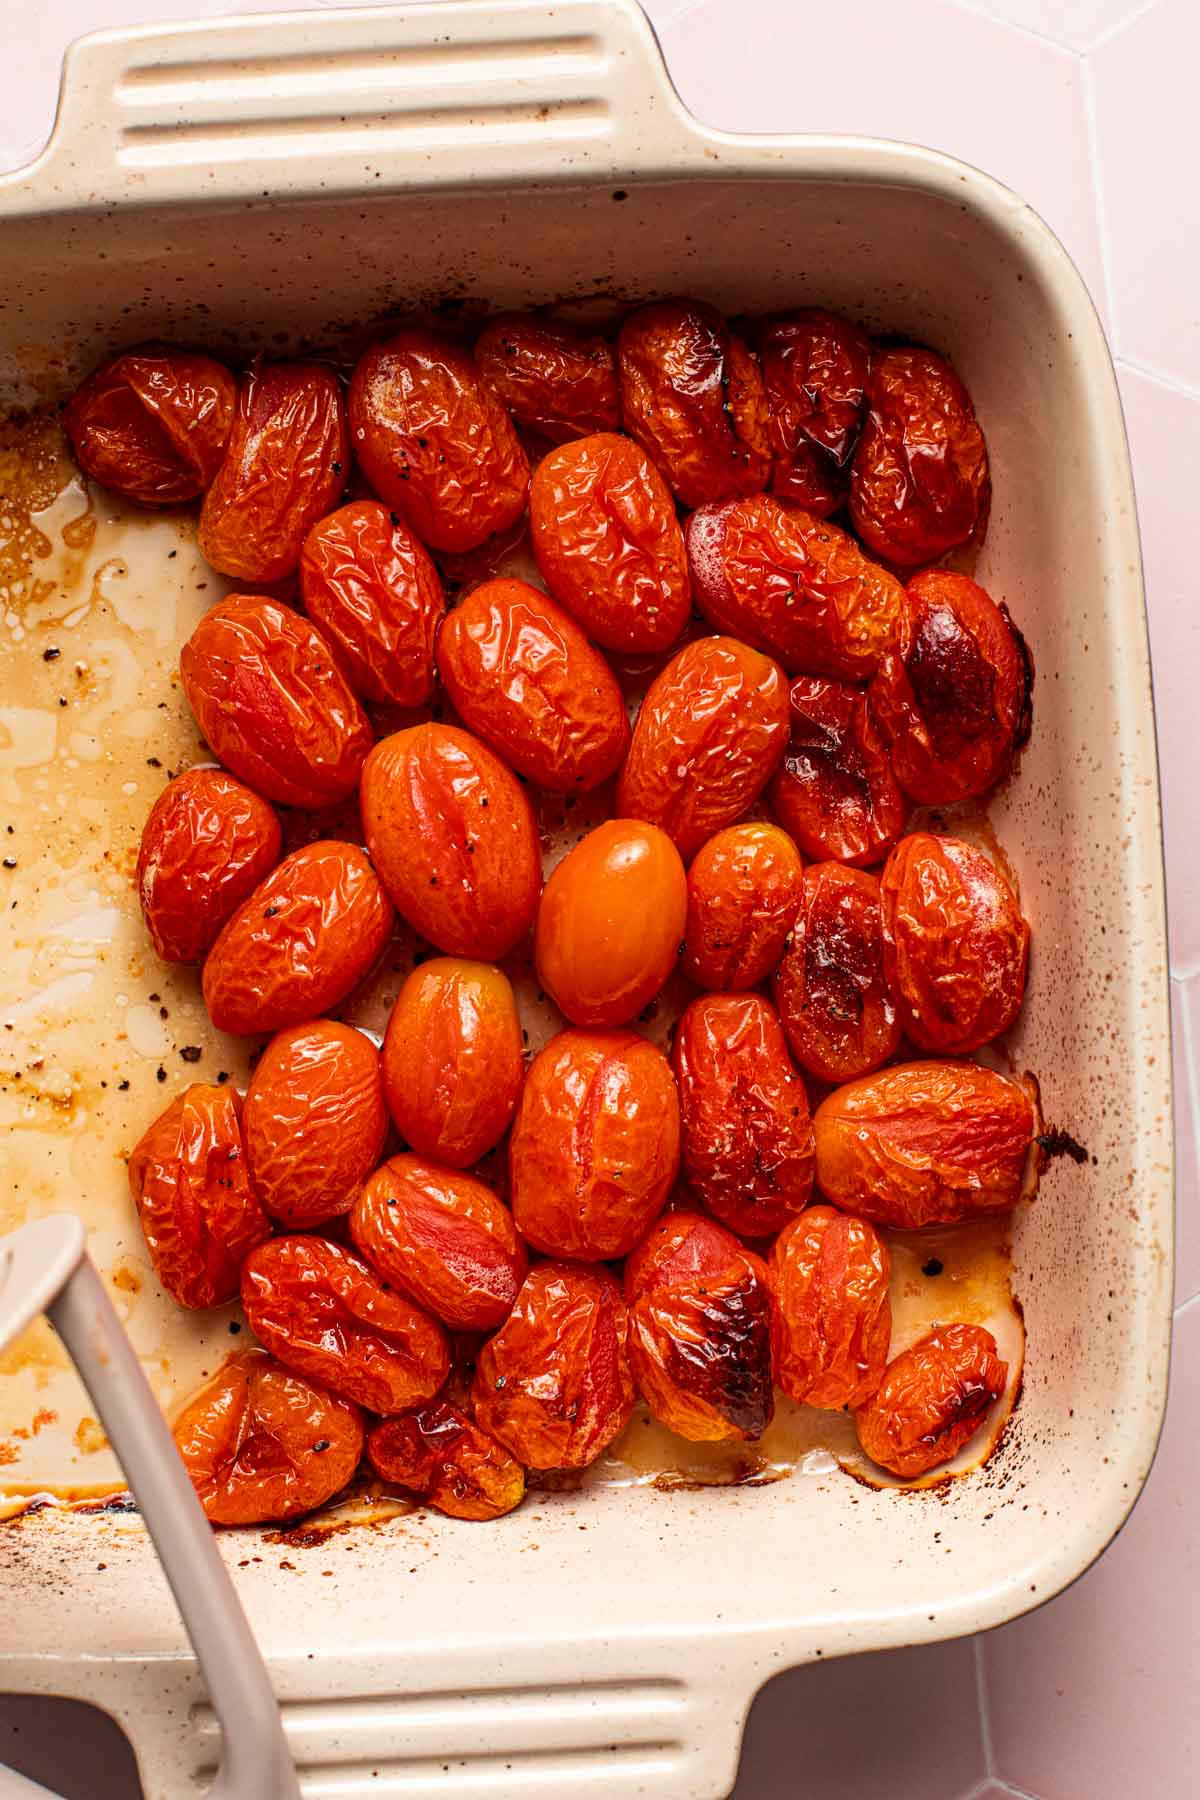 A close-up image of roasted baby plum tomatoes.